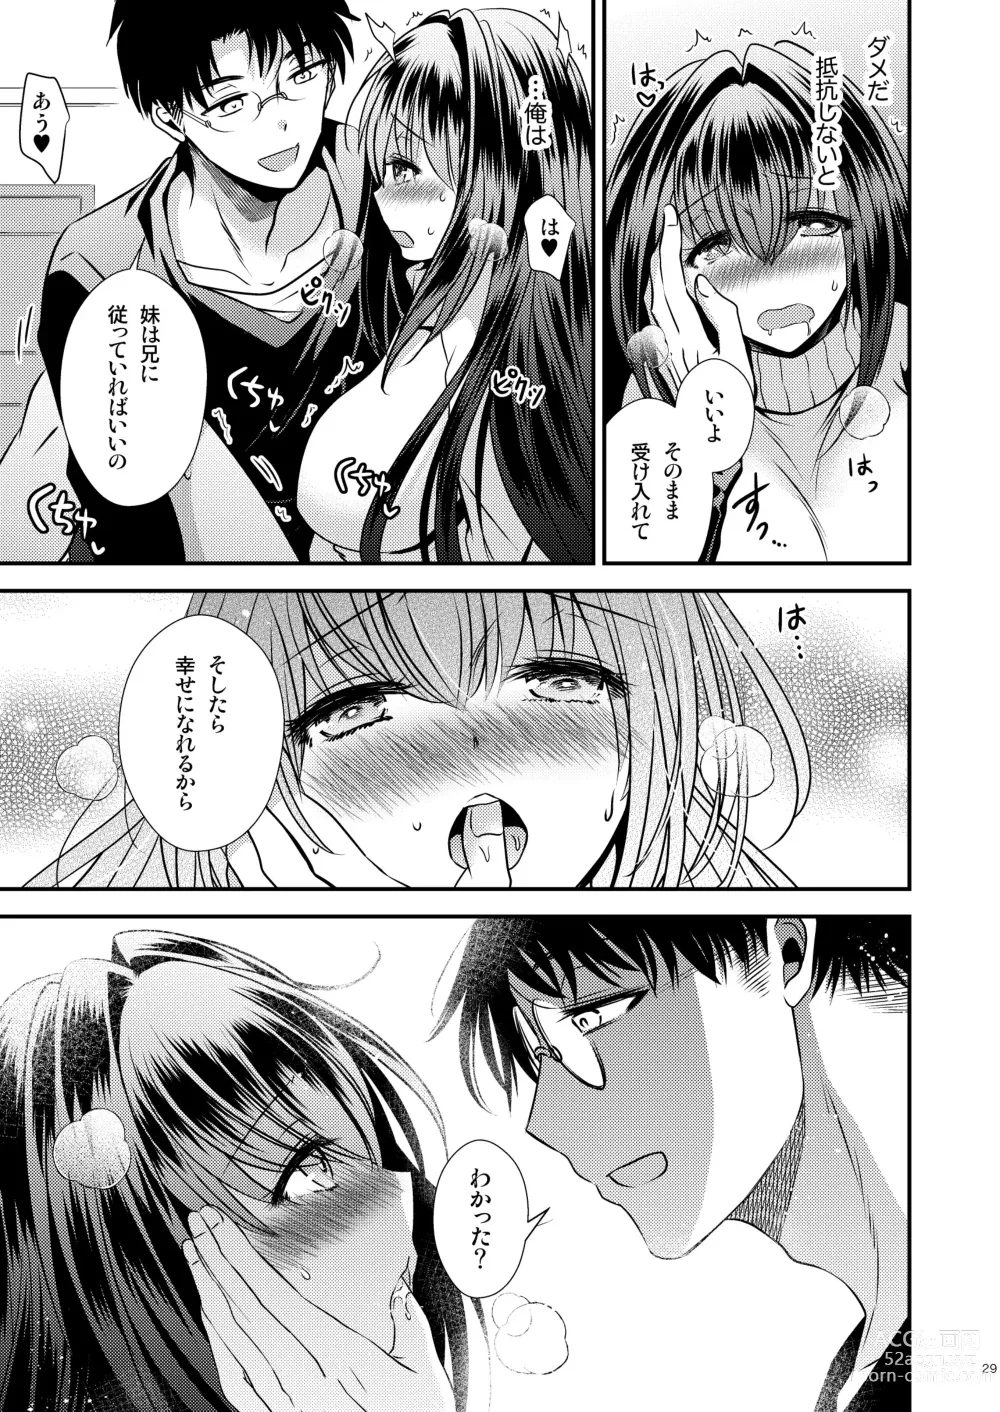 Page 29 of doujinshi 性欲処理に使っていた妹と入れ替わった兄